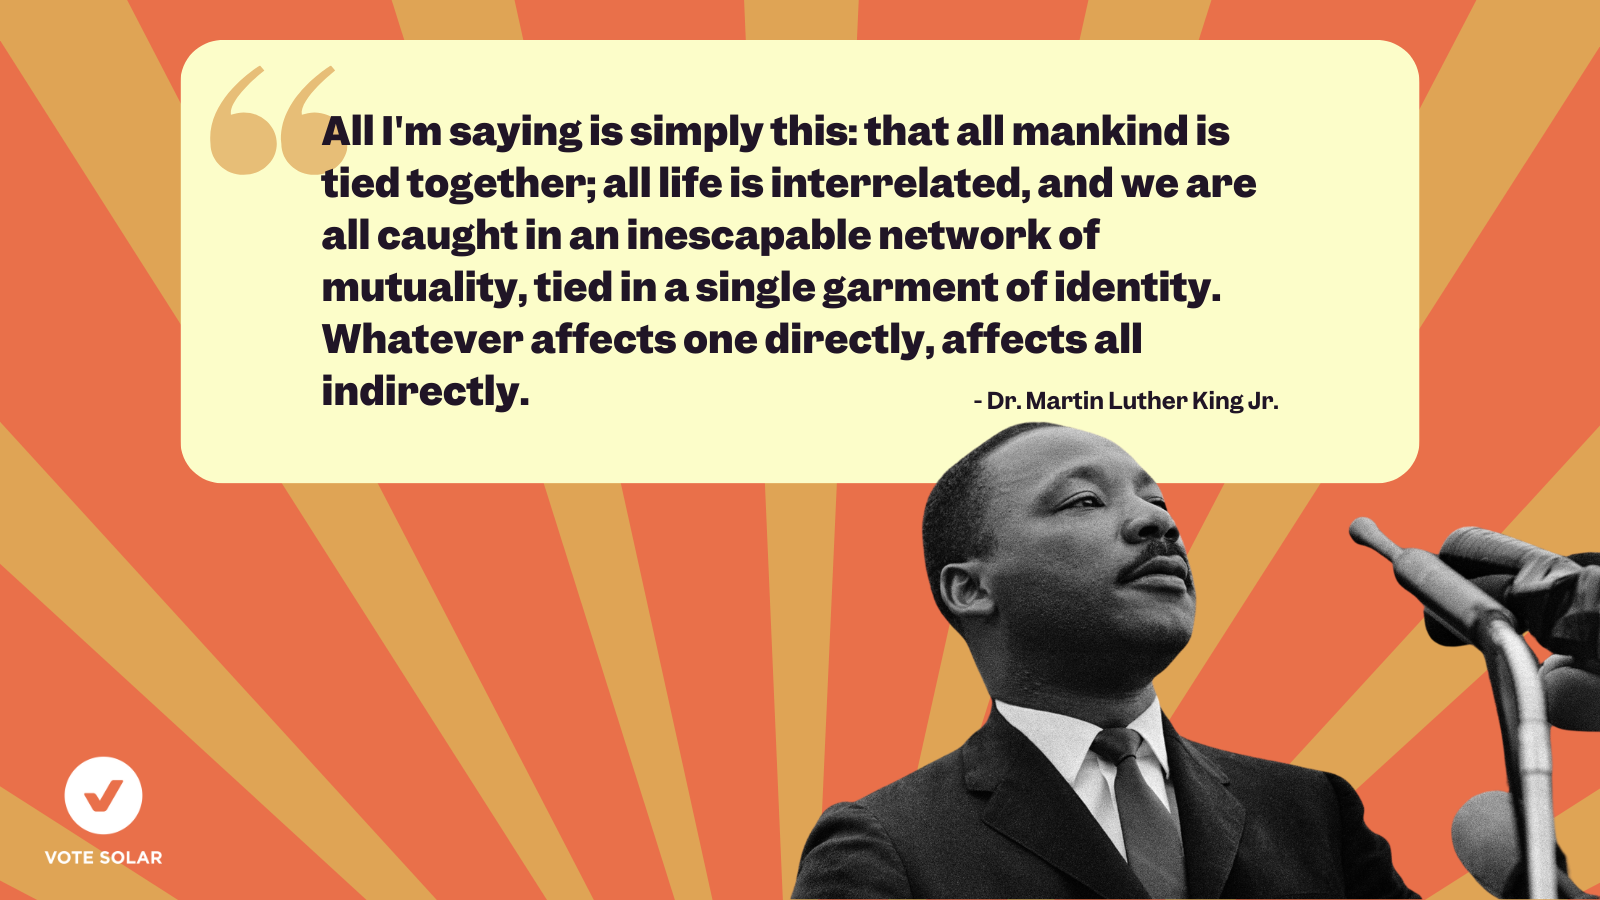 Reflections on Dr. King’s Interconnectedness